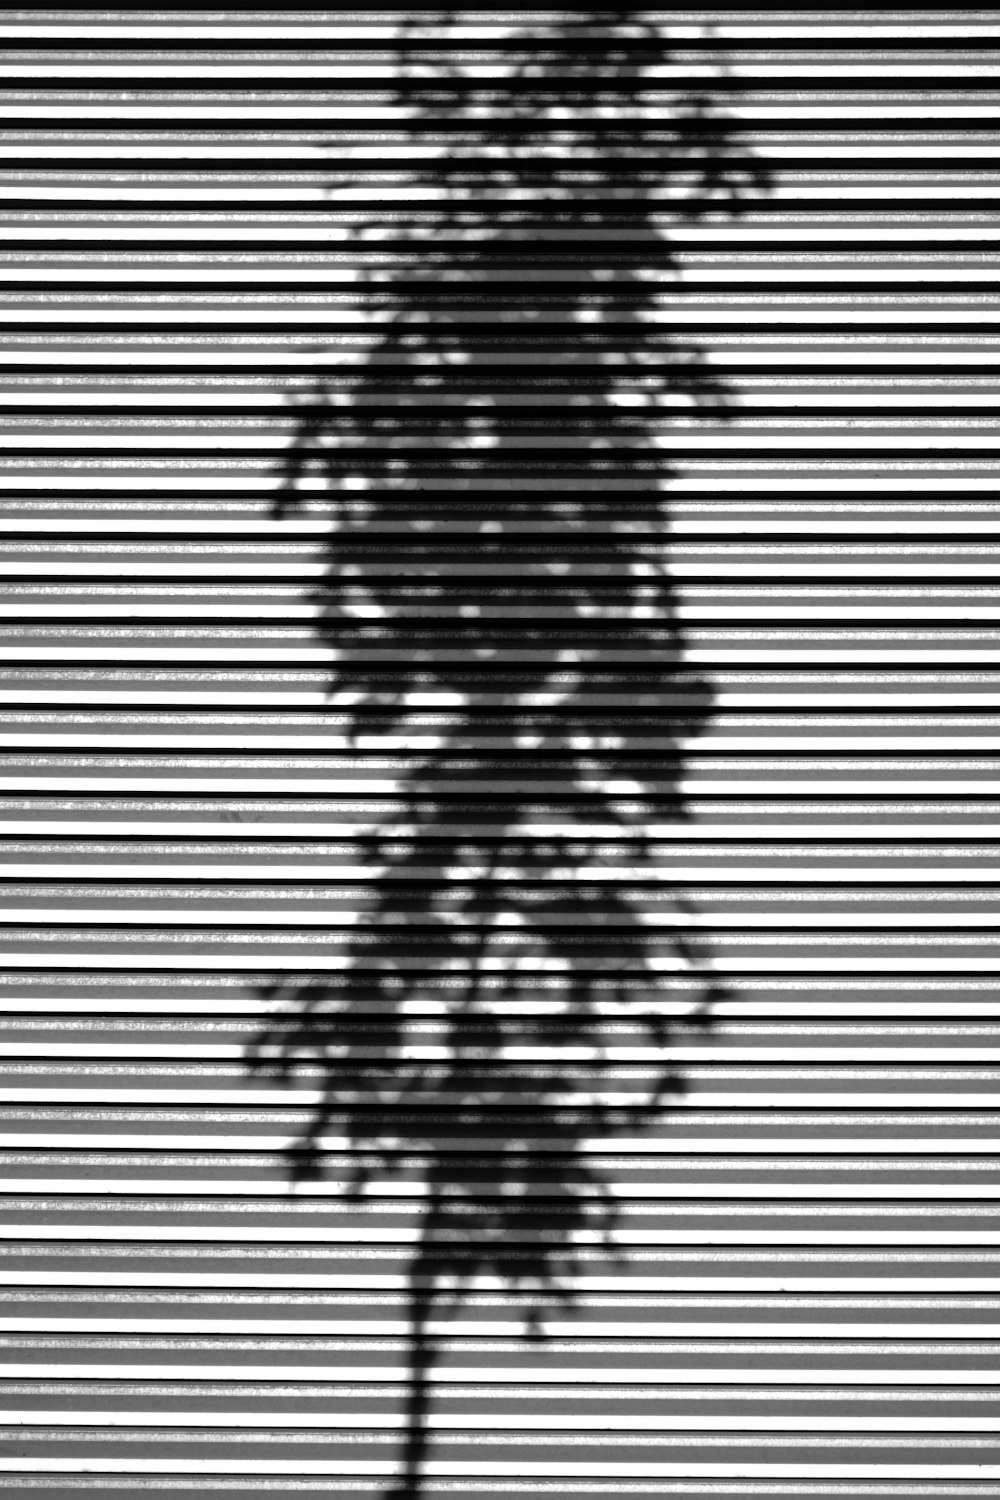 a black and white photo of a tree